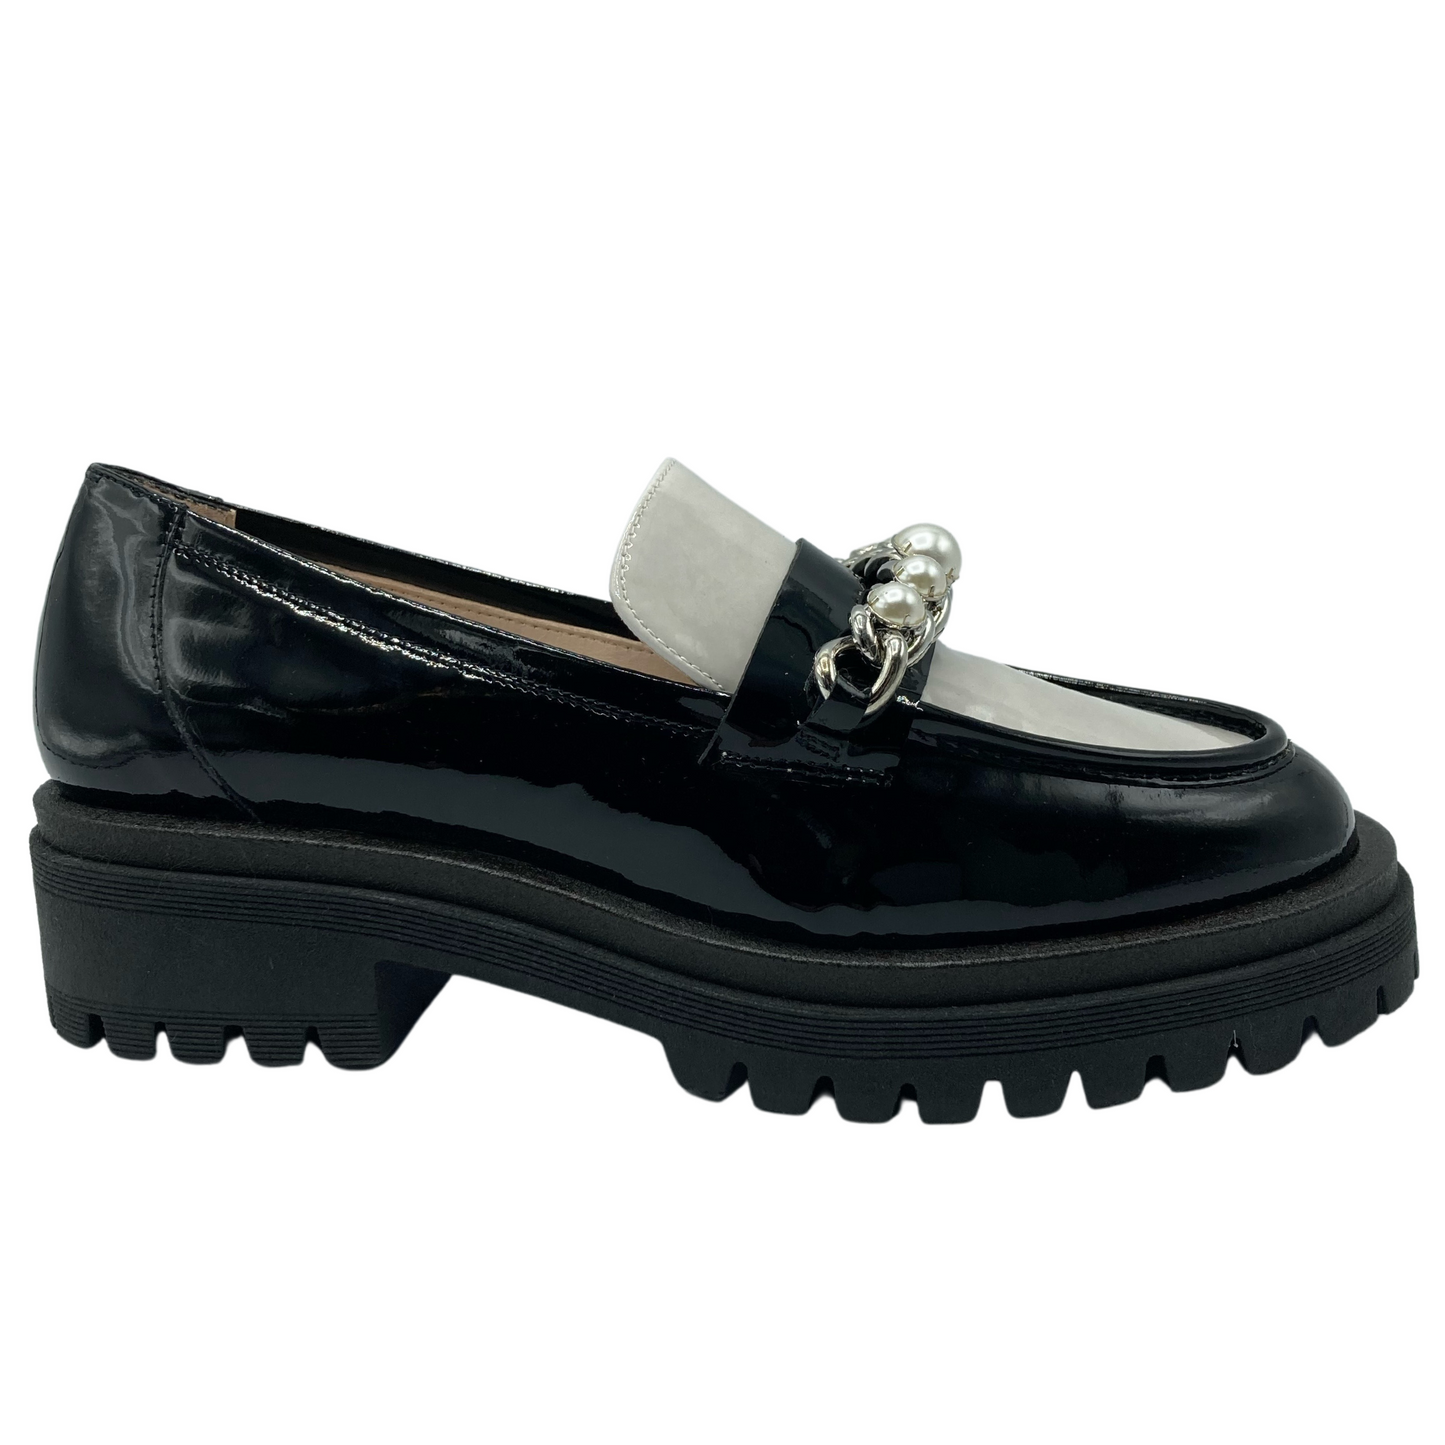 Right facing view of black and white patent leather loafer with rubber lug sole. Pearl and chain detail on upper